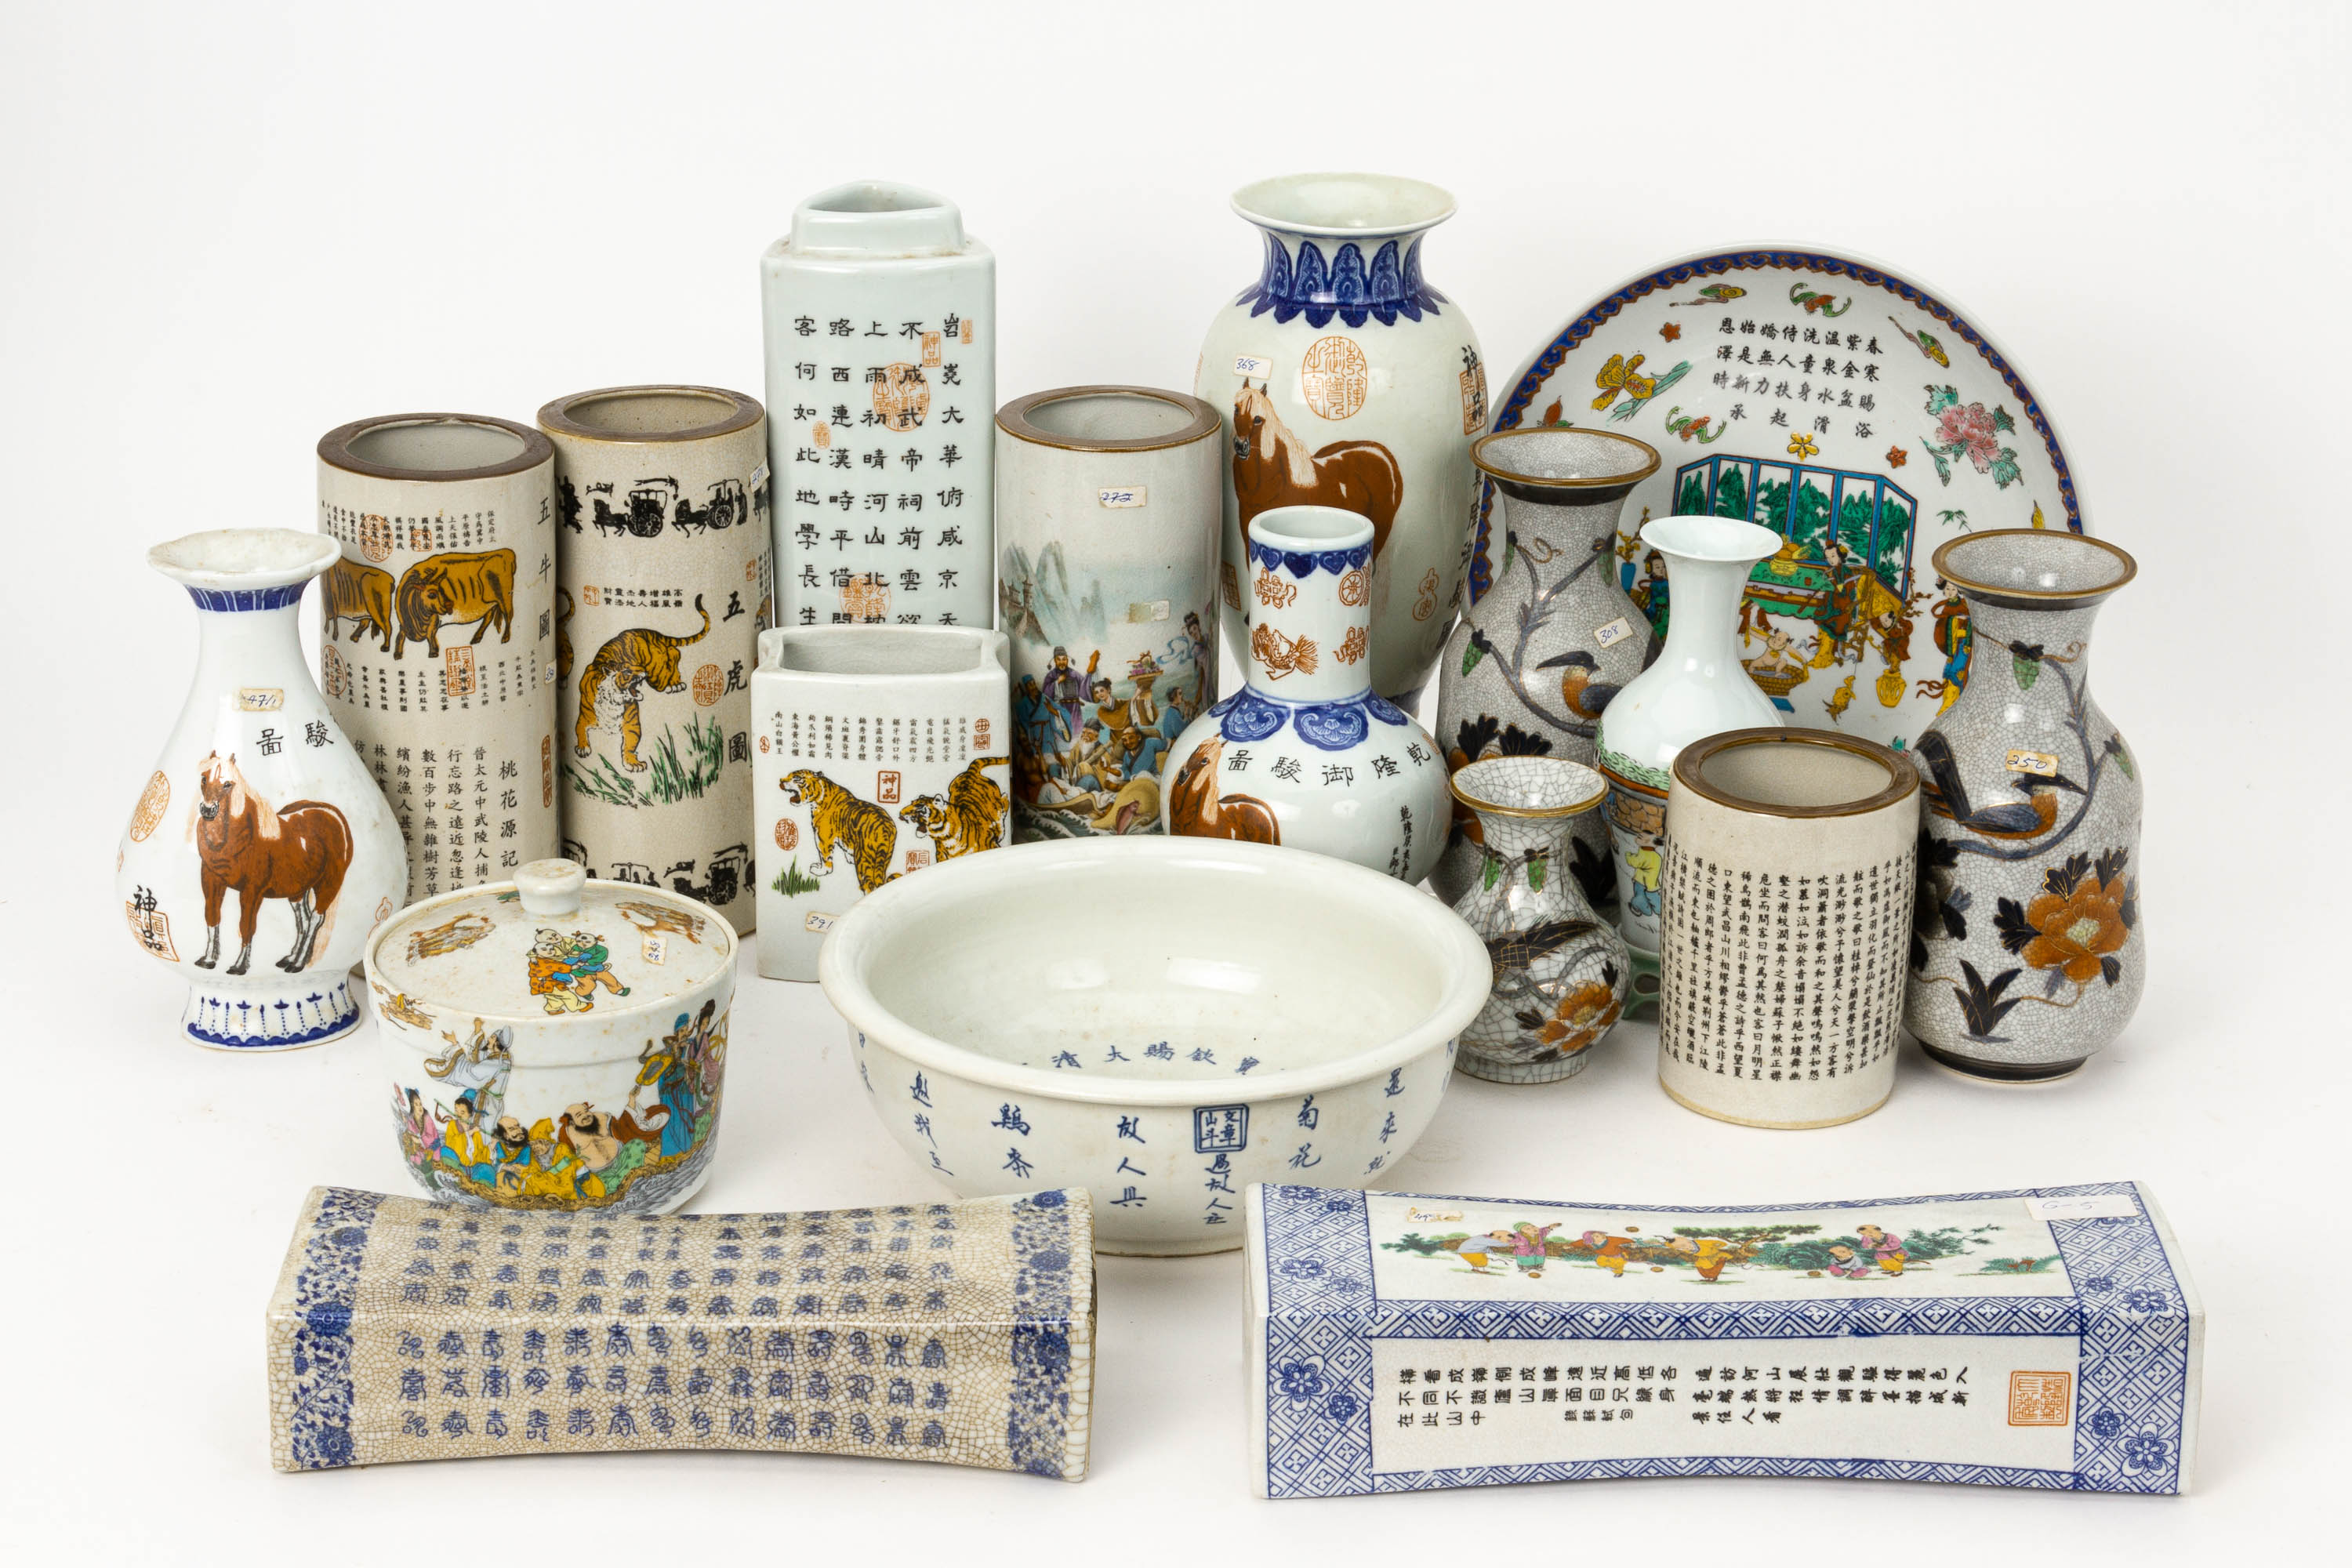 A LARGE GROUP OF CHINESE TRANSFER PRINTED CERAMICS